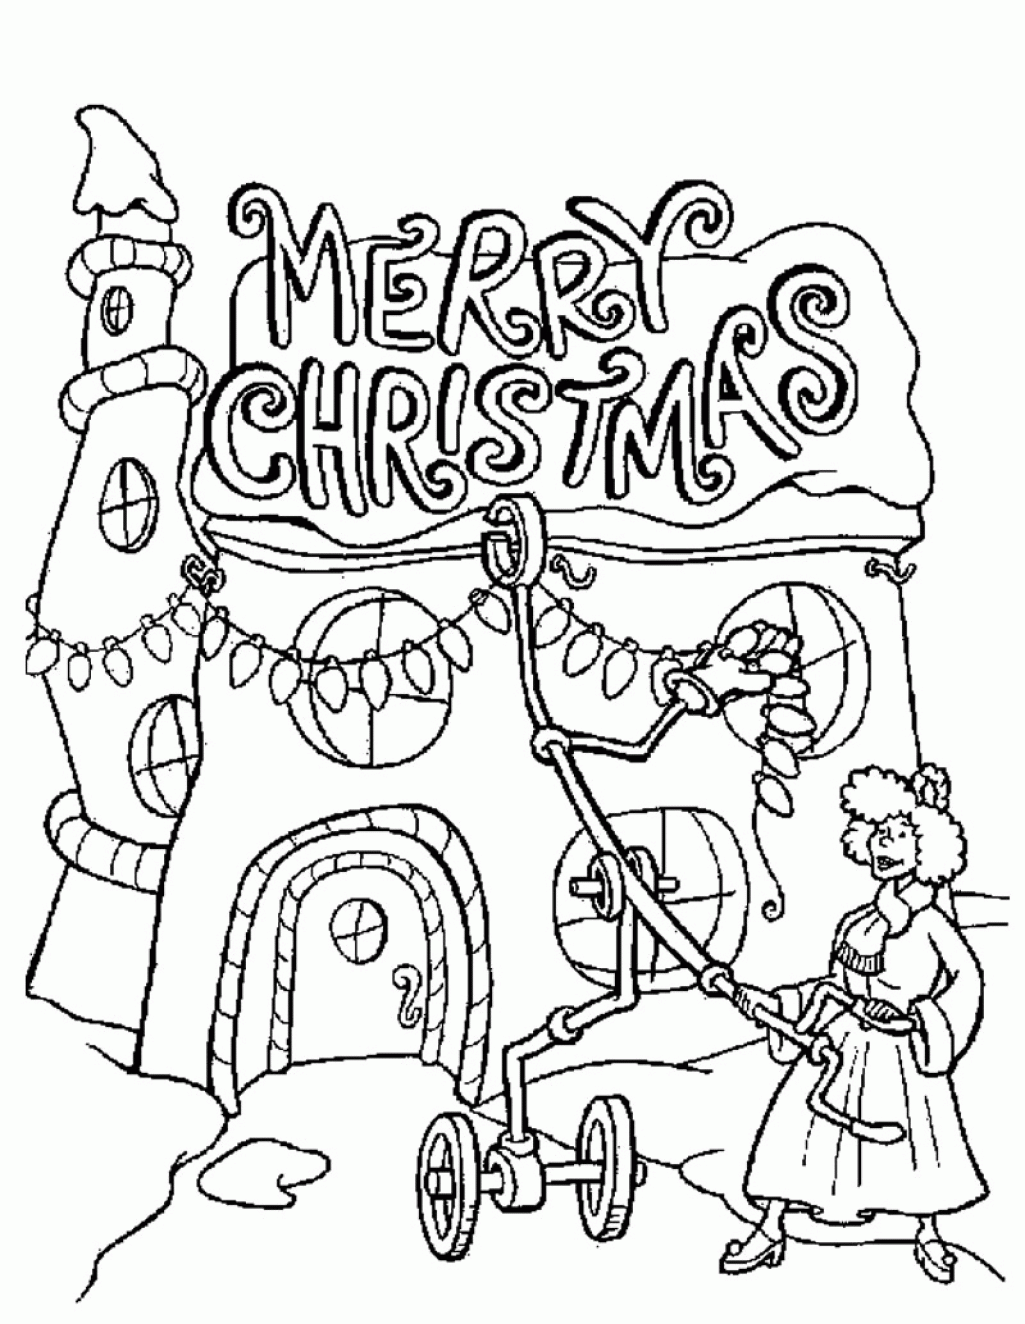 Christmas Color Pages Online   Coloring Page   Coloring Home